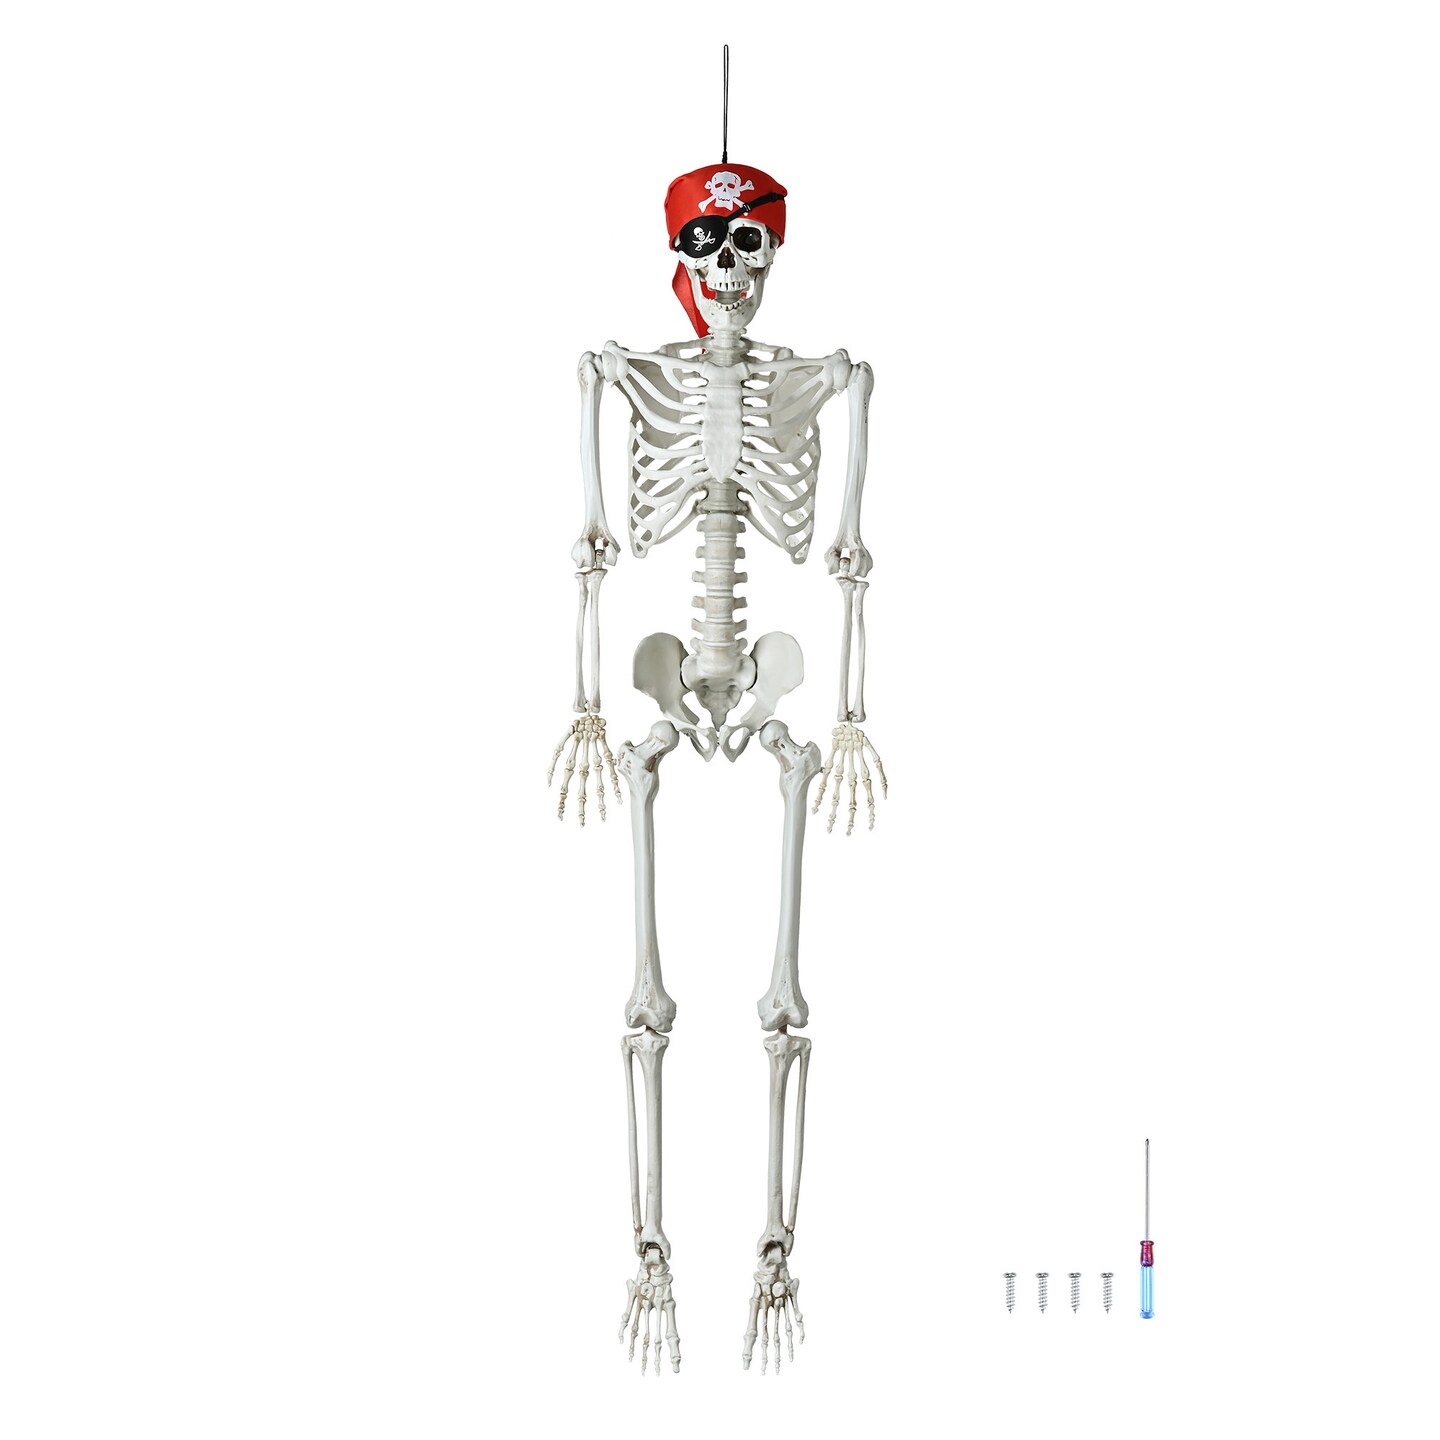 5.4 FT Tall Full Body Skeleton Halloween Decoration with crossbones head scarf and eye patch